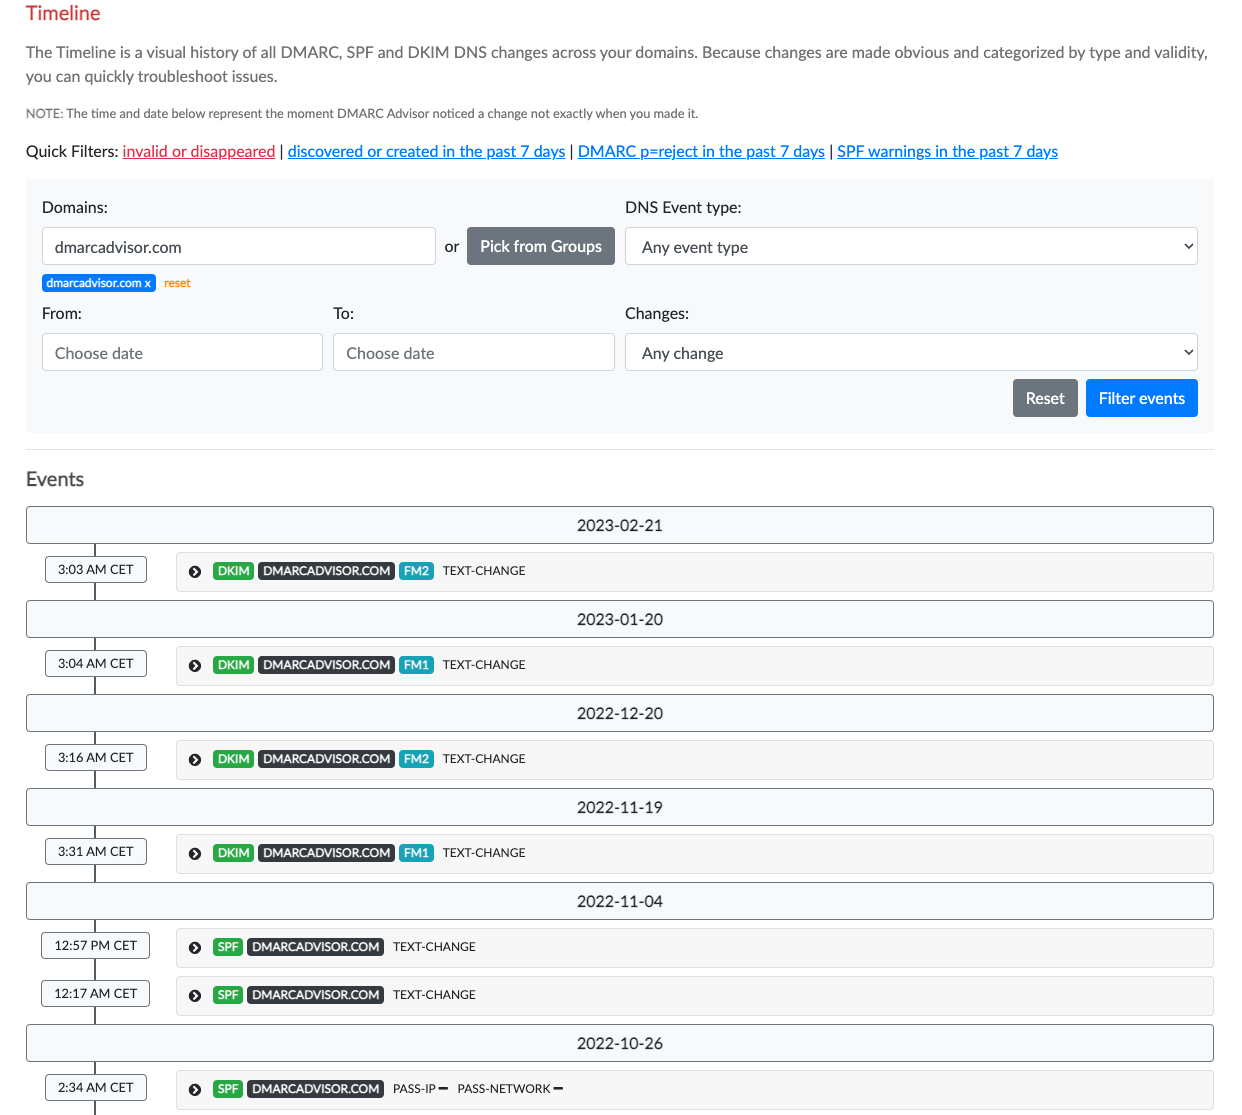 Our Timeline is a visual history of all DMARC, SPF, and DKIM related DNS changes across your domains. Quickly troubleshoot issues with categorized changes. Stay in control of your domains' security with our Timeline tool.